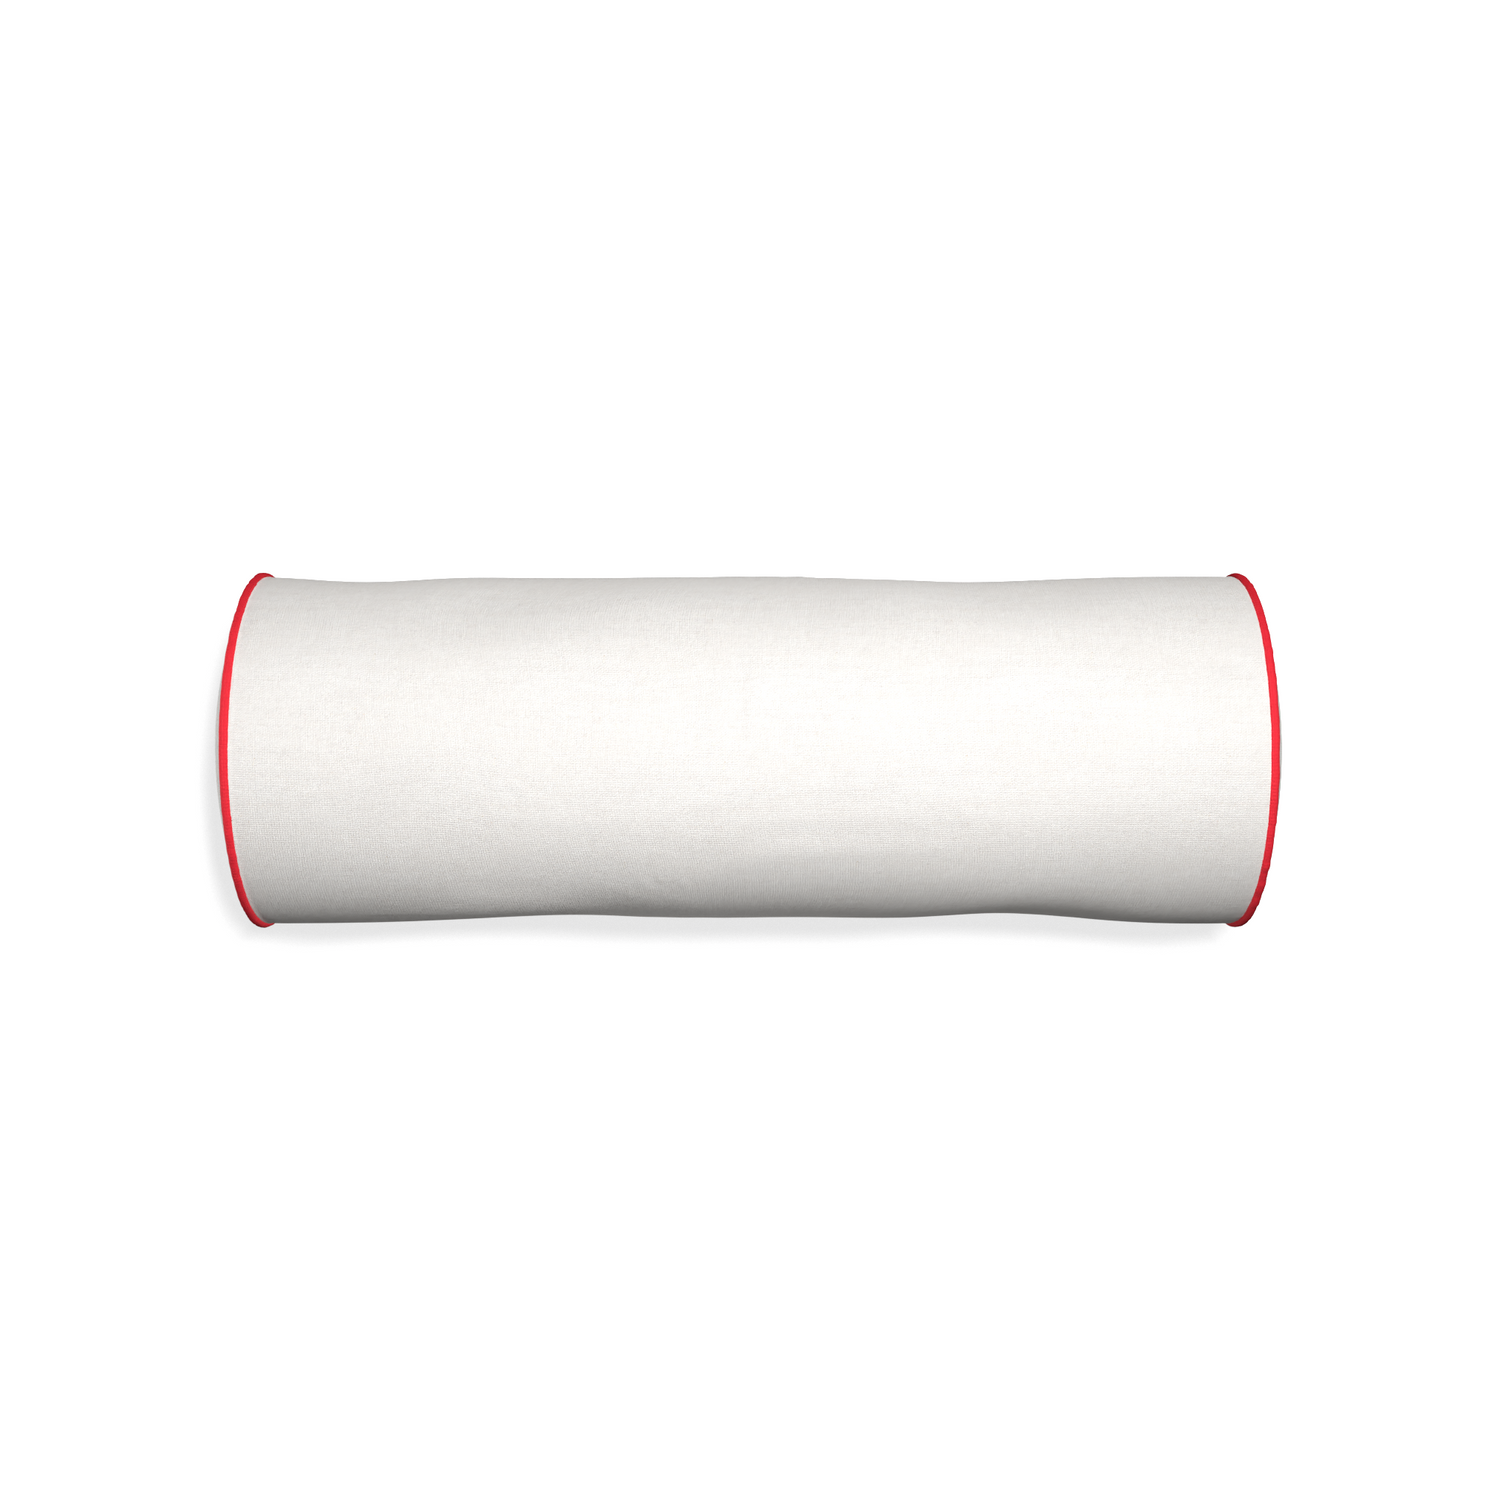 Bolster flour custom natural whitepillow with cherry piping on white background